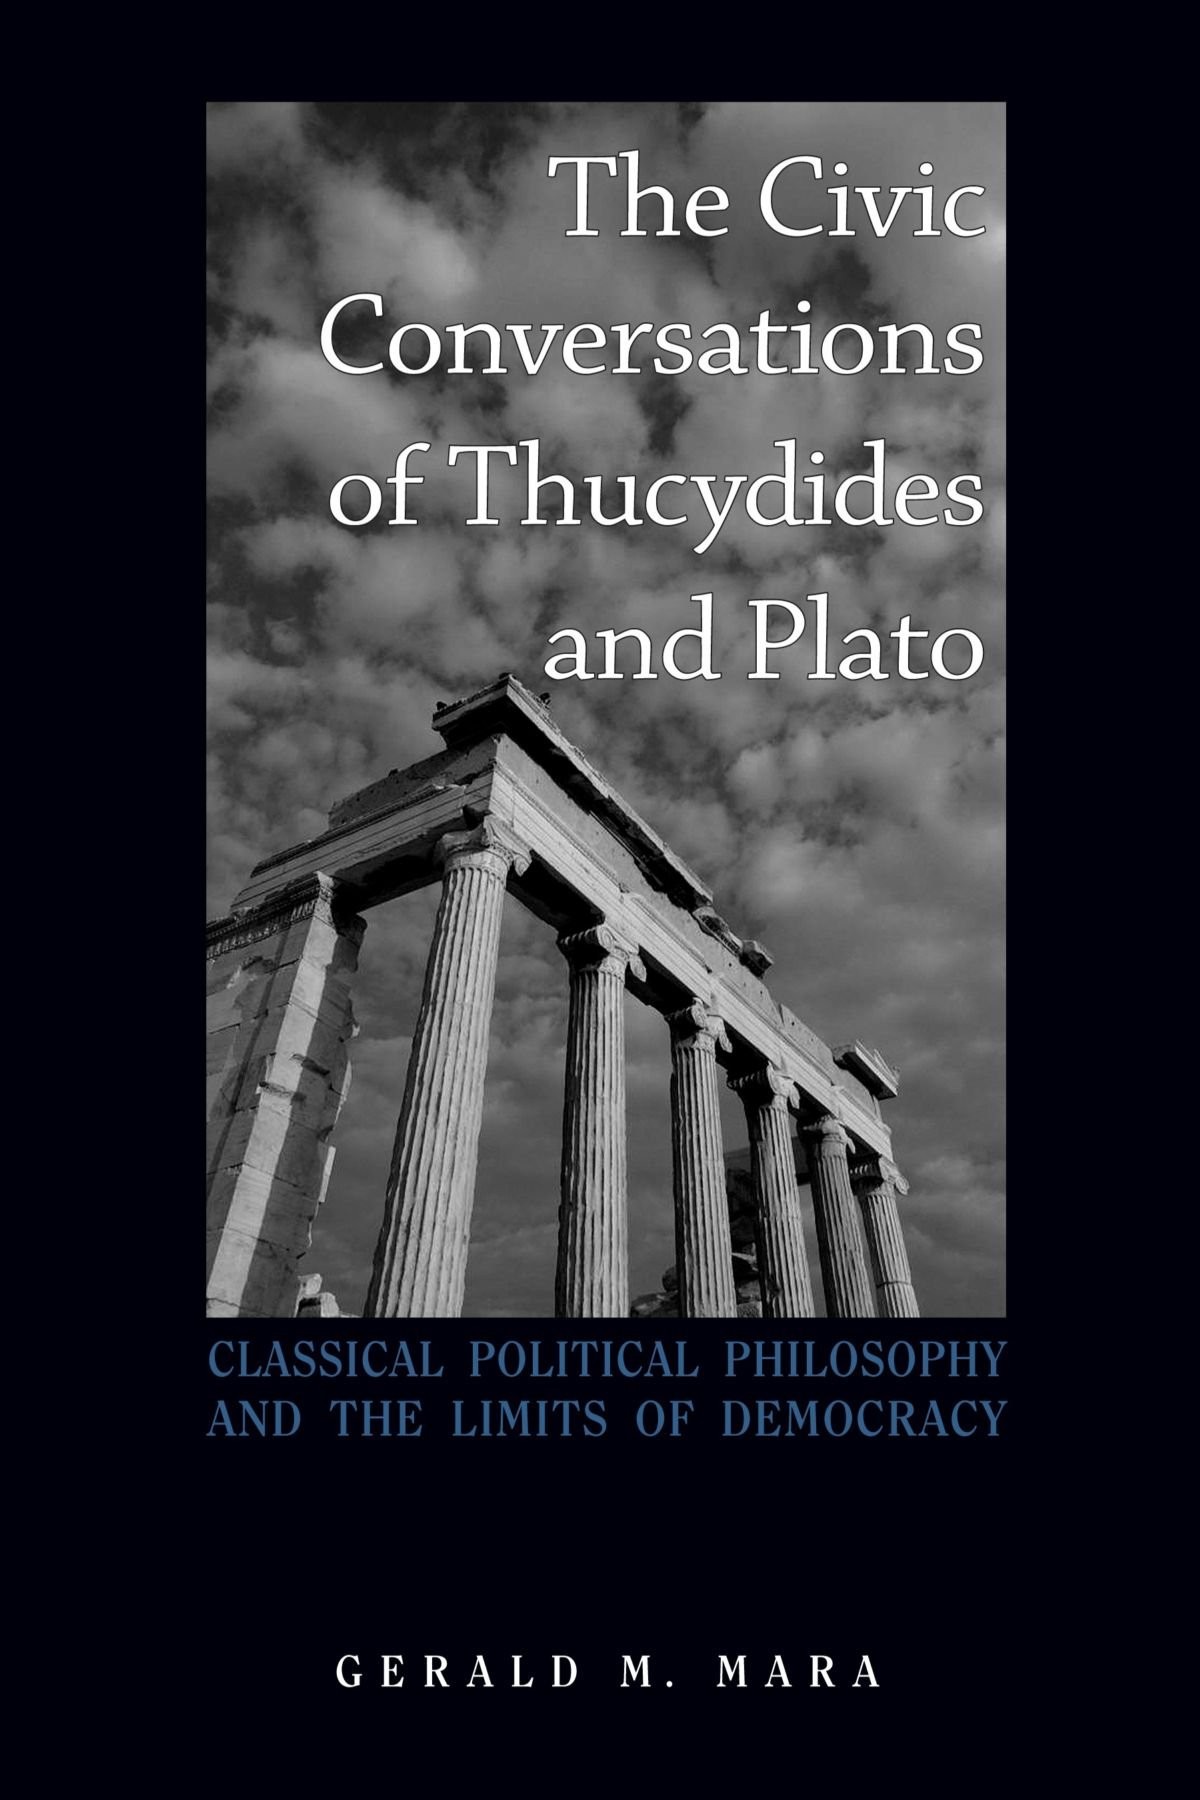 The Civic Conversations of Thucydides and Plato: Classical Political Philosophy and the Limits of Democracy